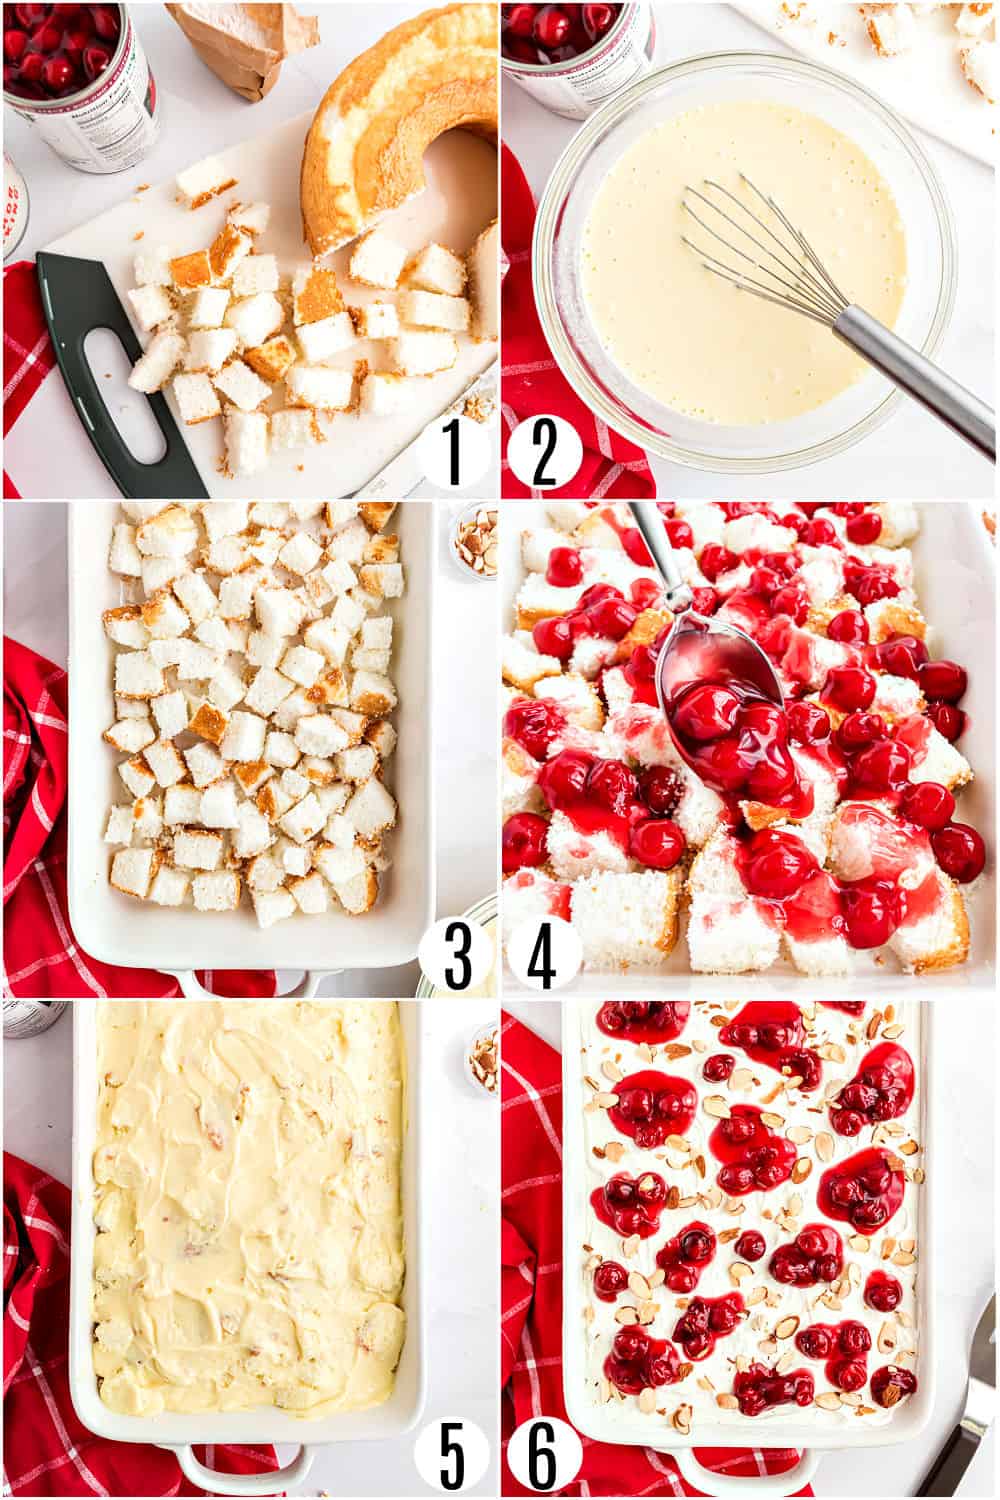 Step by step photos showing how to make heaven on earth cake.